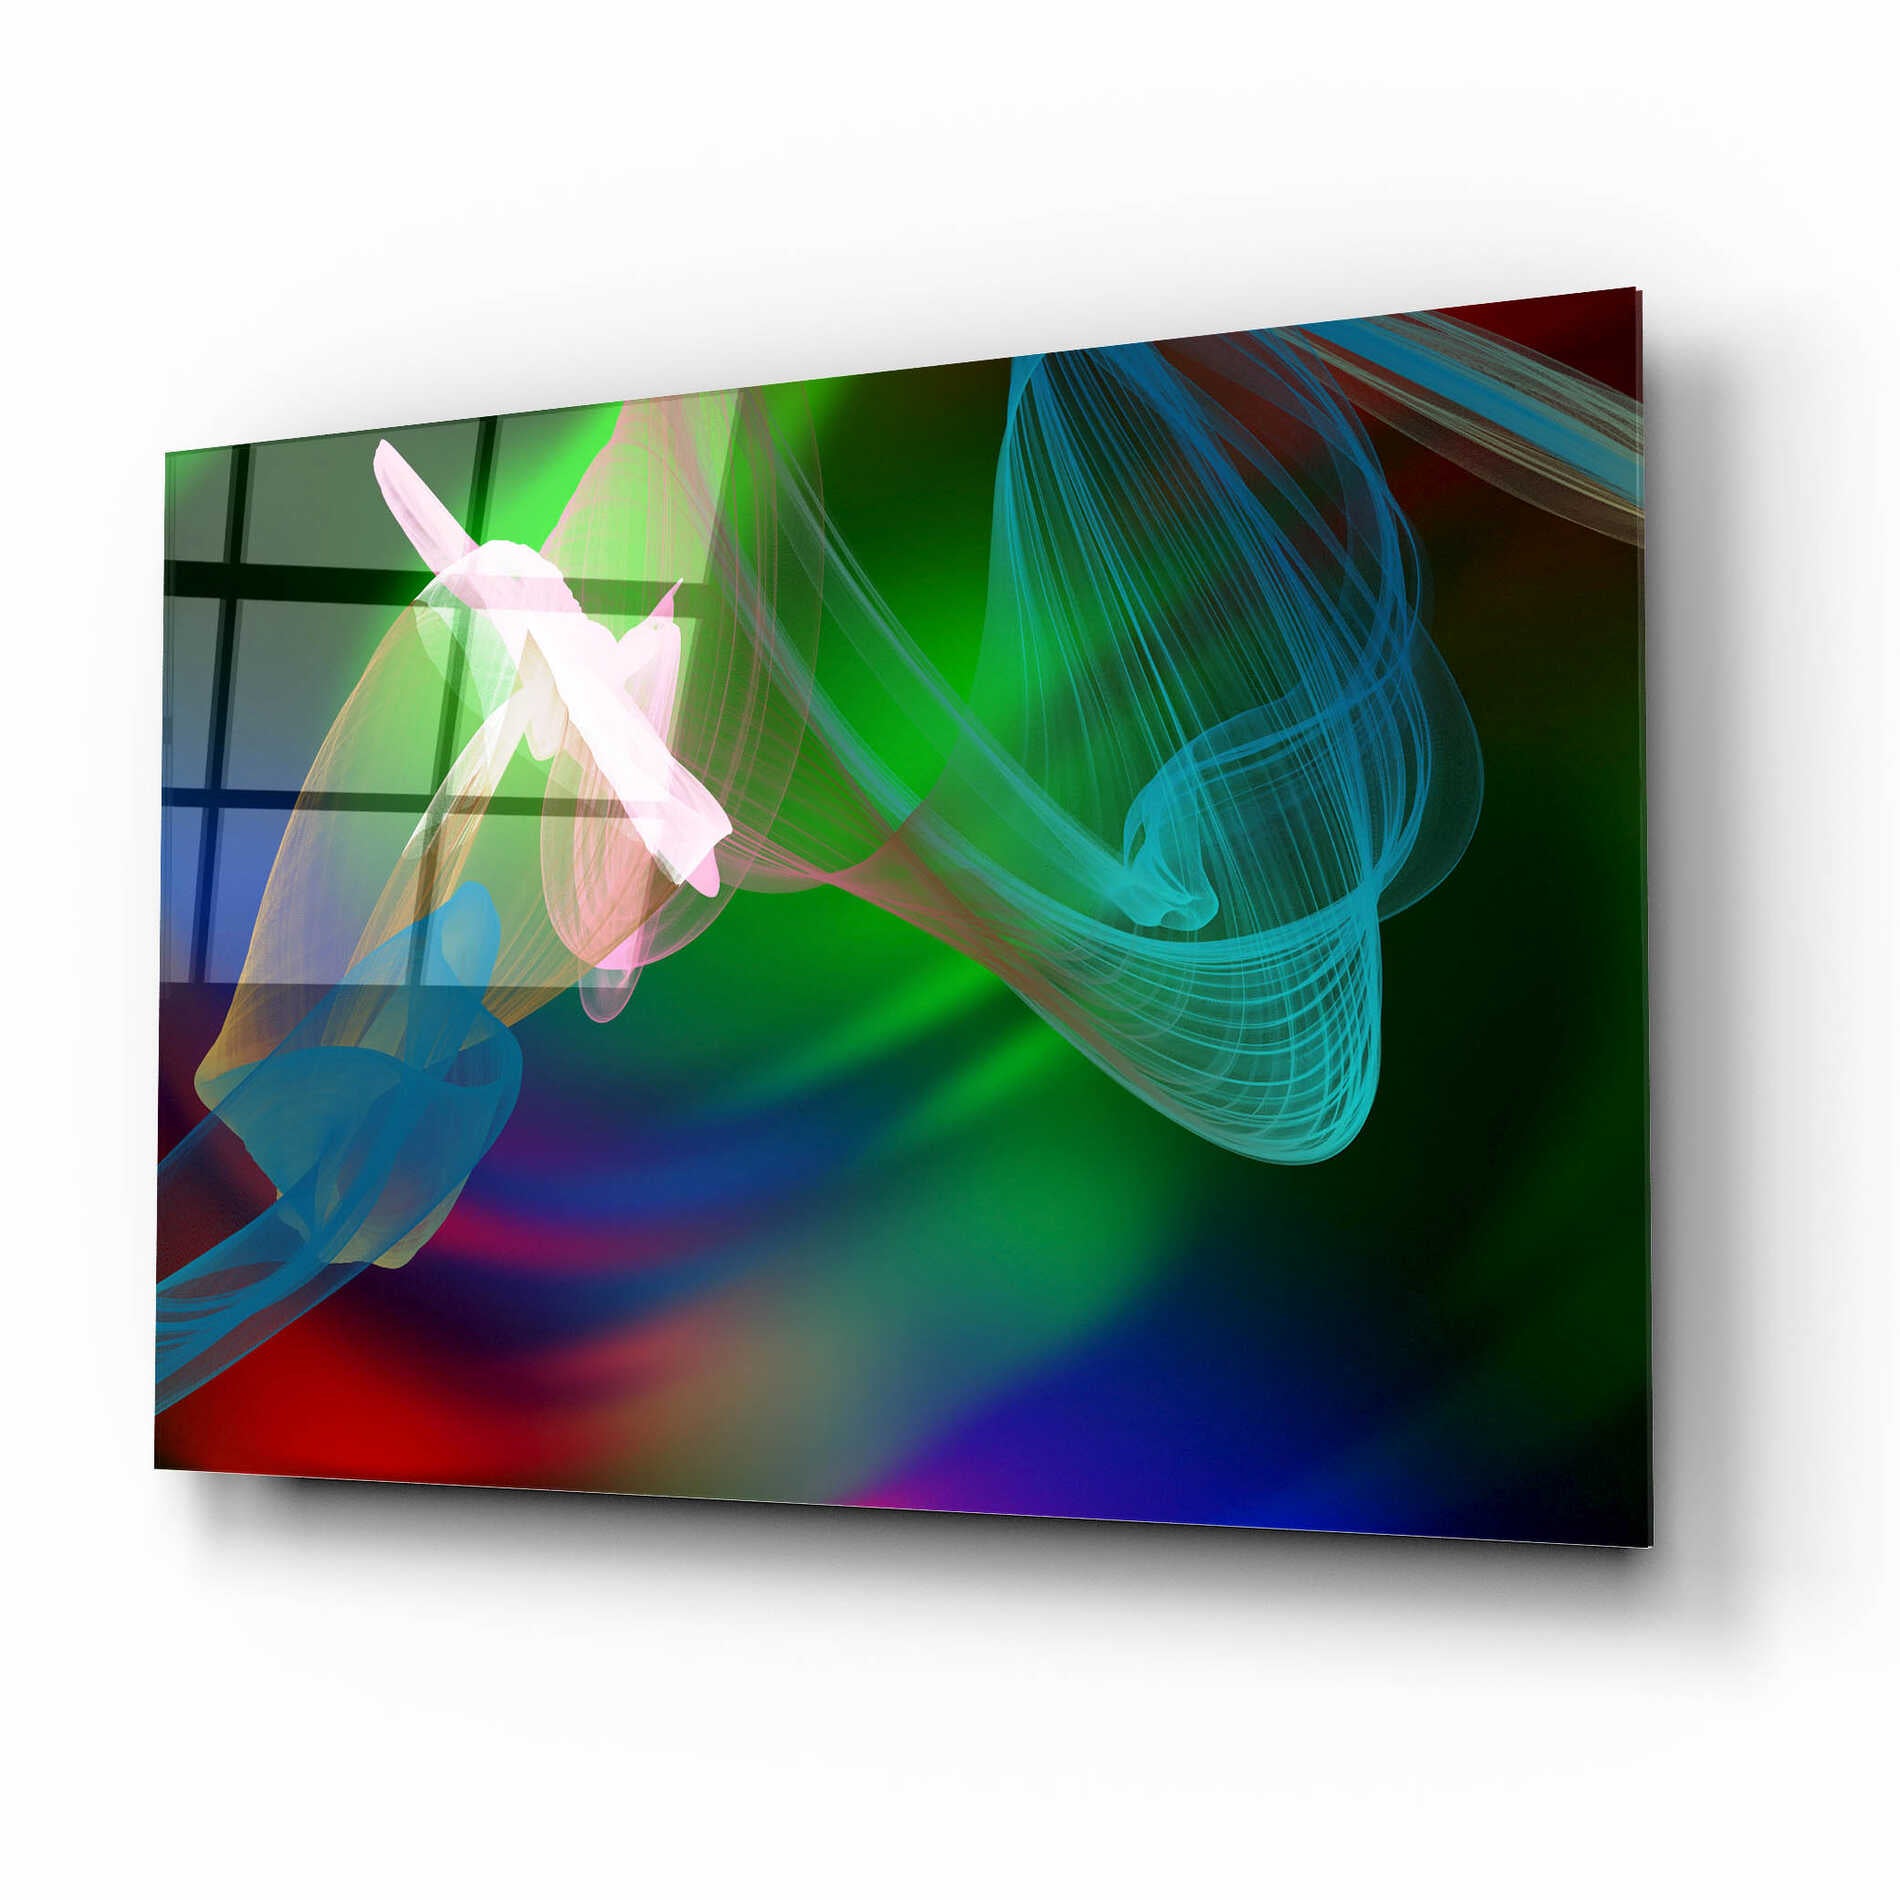 Epic Art 'Inverted Color In The Lines 2' by Irena Orlov Acrylic Glass Wall Art,16x12